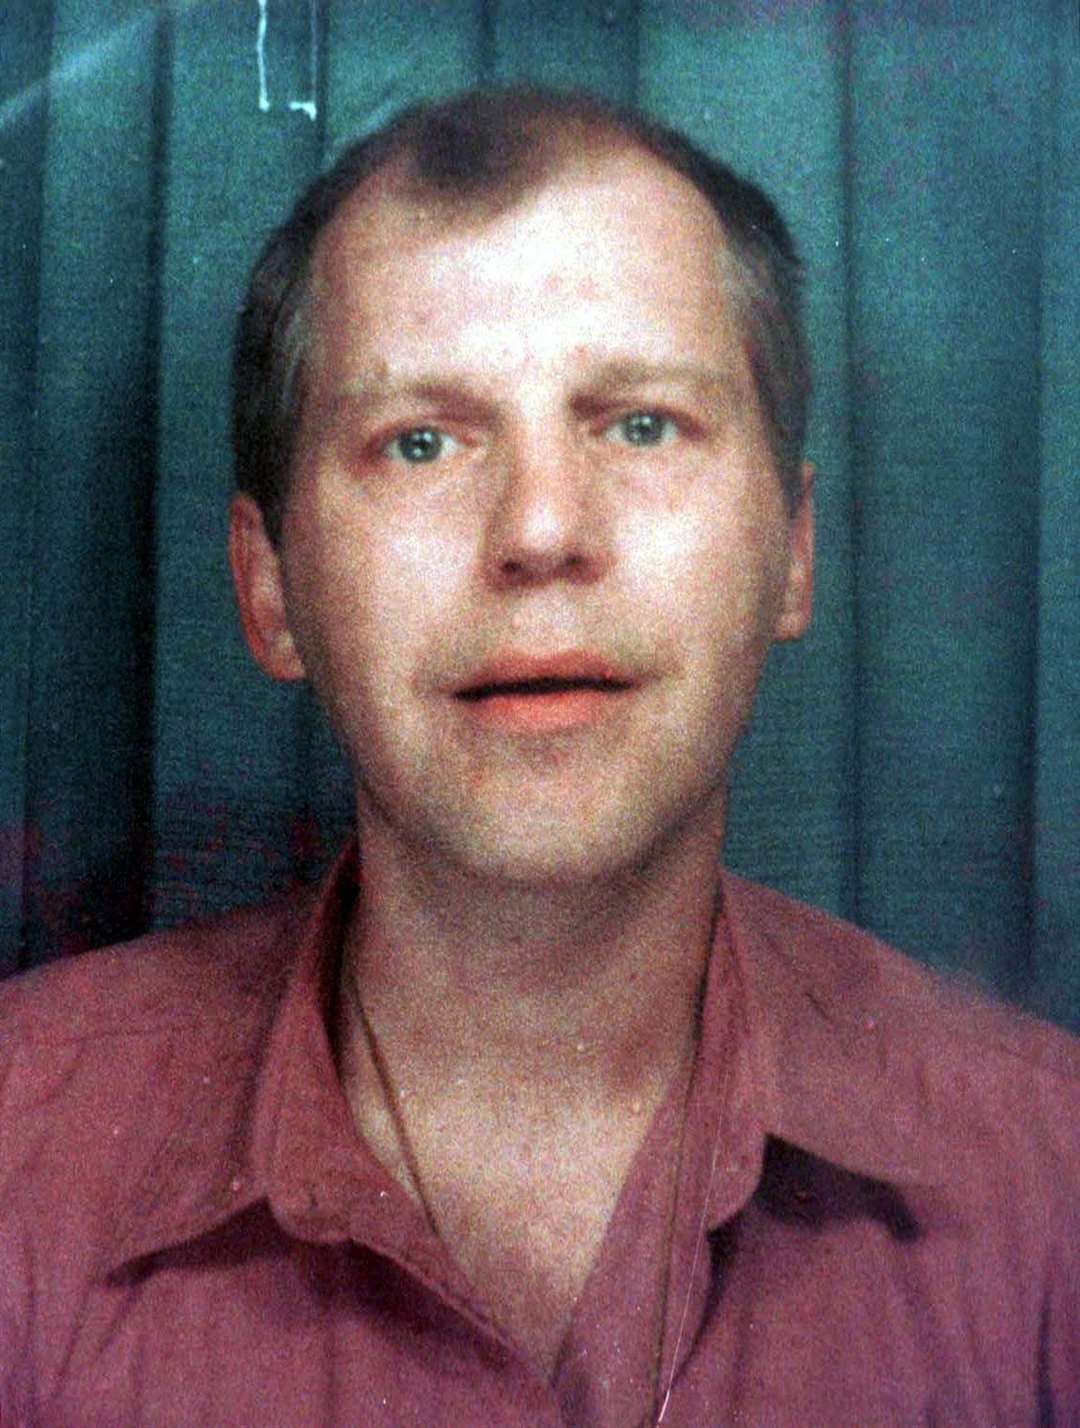 Michael Stone pictured in the 1990s